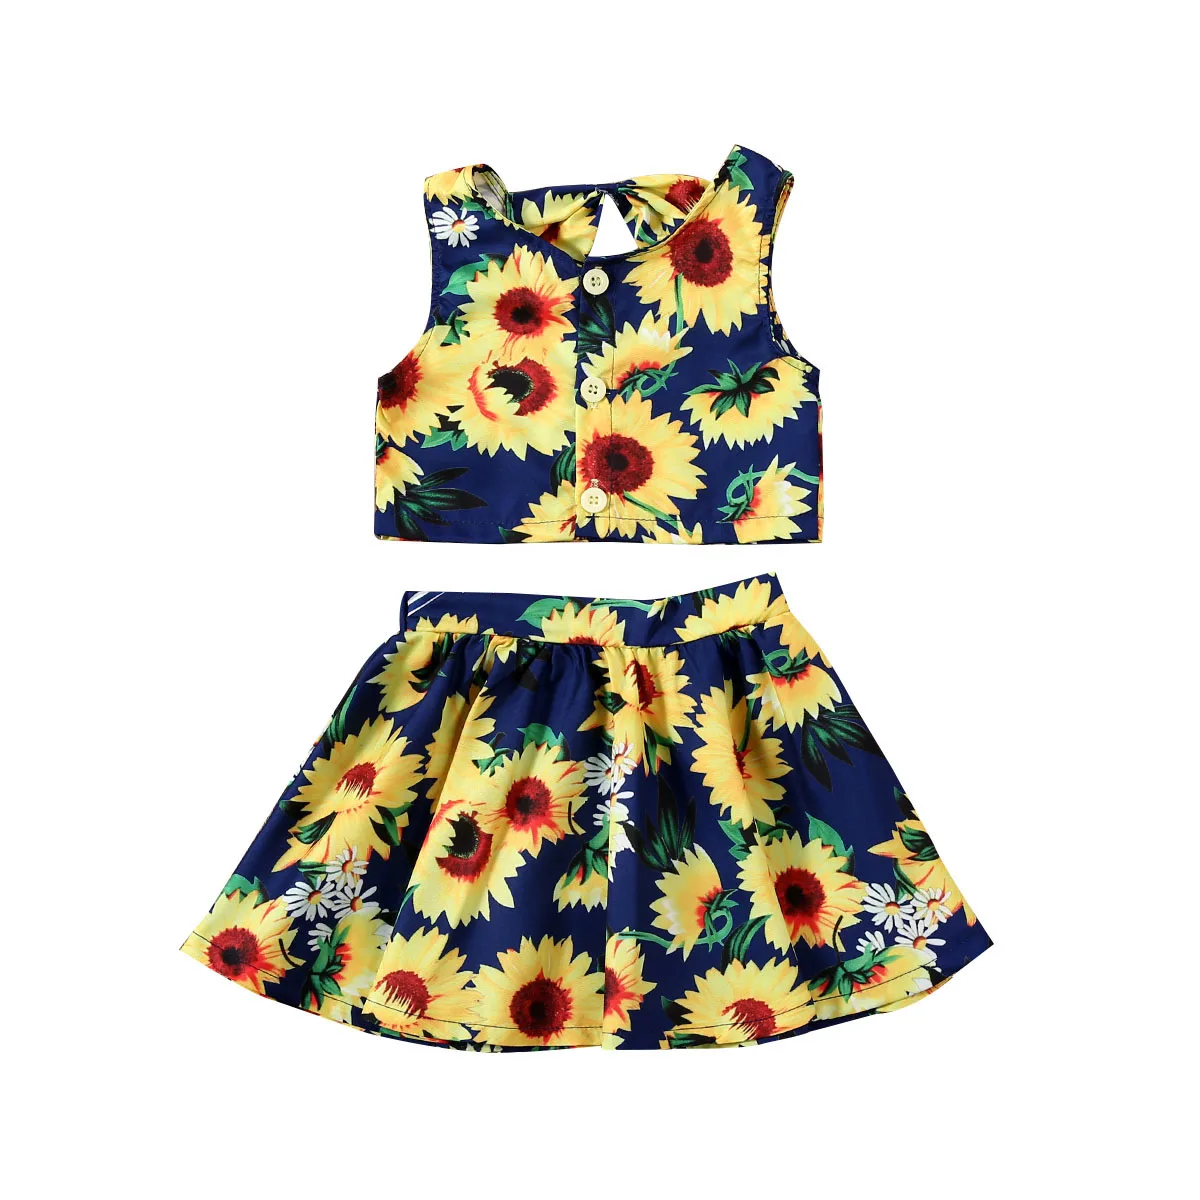 Pudcoco Baby Summer Clothing 2-6Y Toddler Kid Baby Girl Clothes Floral Short Sleeve Tops +Mini Skirt 2pcs Outfits Set 1-5Y